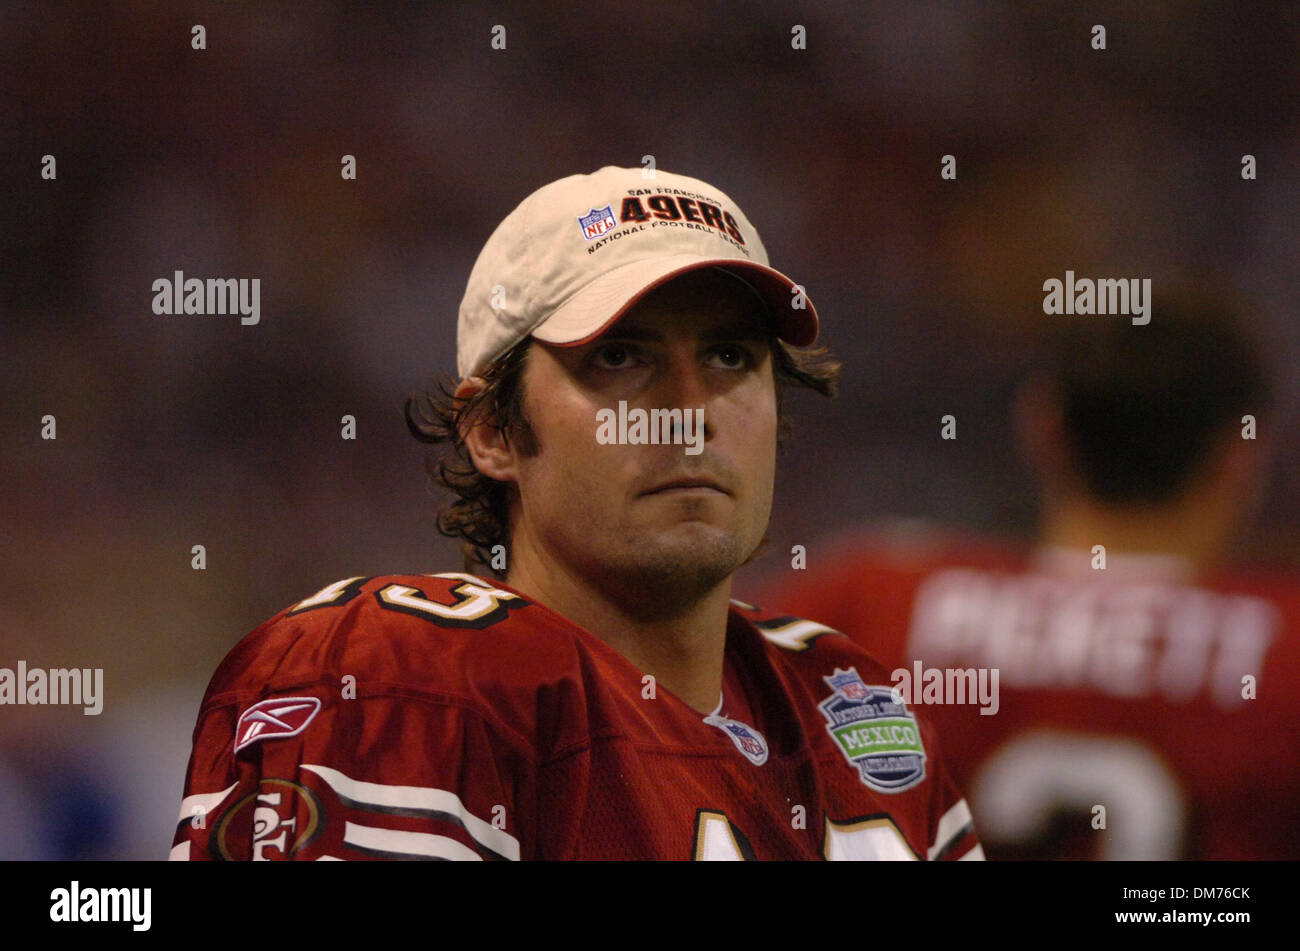 Oct 02, 2005; Mexico City, MEXICO; NFL FOOTBALL: 49ers starting quarterback Tim Rattay was removed from the game in the 4th quarter in Sunday evenings San Francisco 49ers 31-14 loss to the Arizona Cardinals at Estadio Azteca in Mexico City. Mandatory Credit: Photo by Jose Luis Villegas/Sacramento Bee/ZUMA Press. (©) Copyright 2005 by Jose Luis Villegas/Sacramento Bee Stock Photo